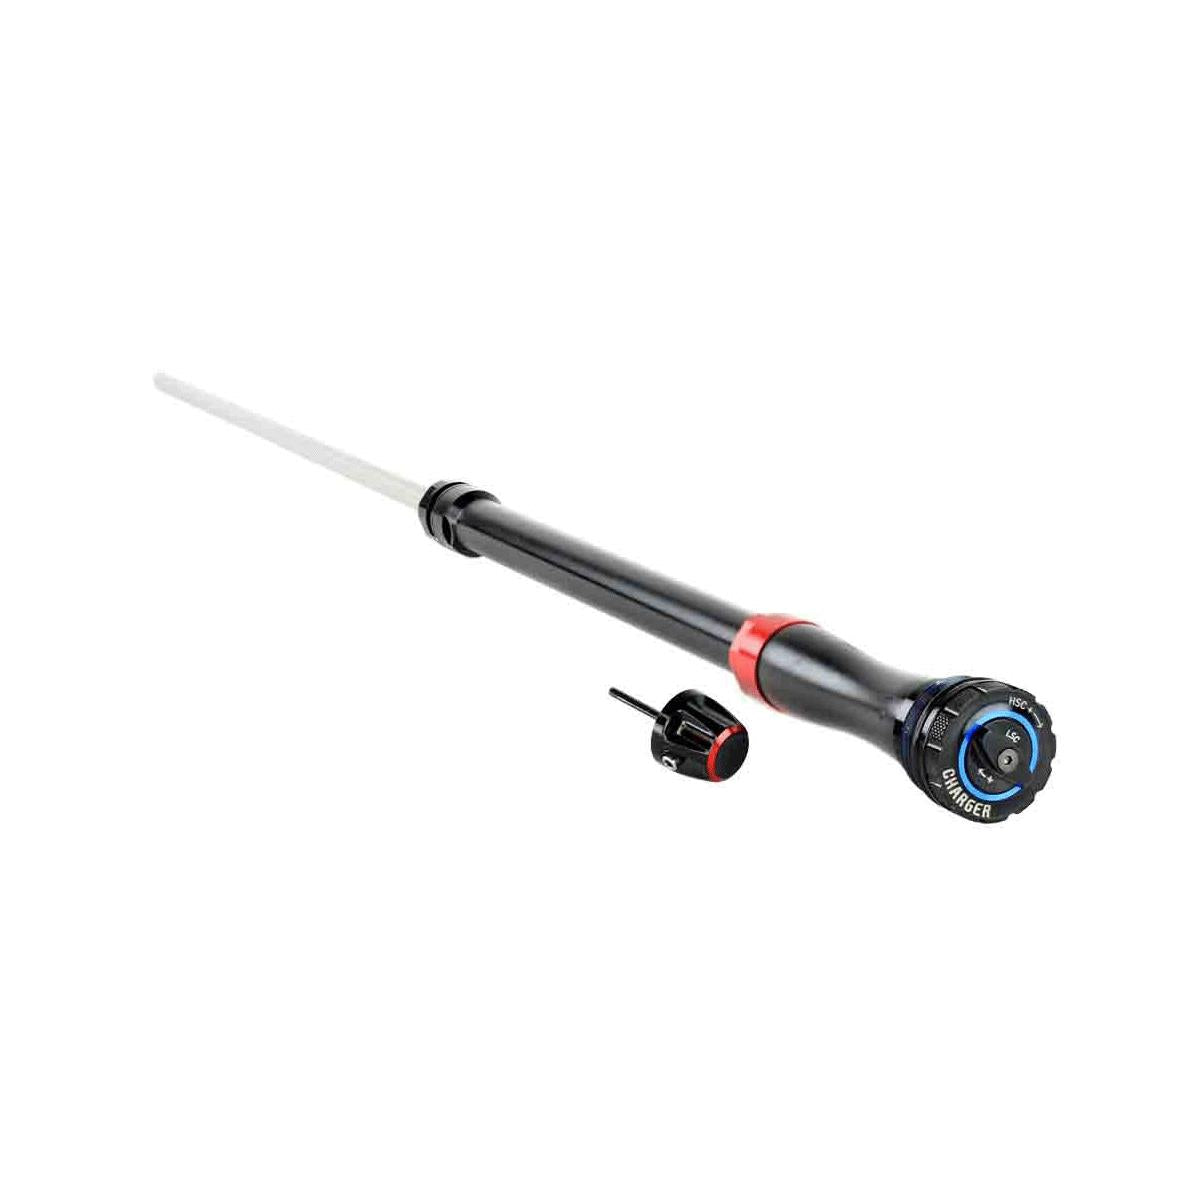 ROCKSHOX DAMPER UPGRADE KIT - CHARGER2.1 RC2 CROWN HIGH SPEED, LOW SPEED COMPRESSION (INCLUDES COMPLETE RIGHT SIDE INTERNALS) - LYRIK B1+/YARI A1+ (2016+)